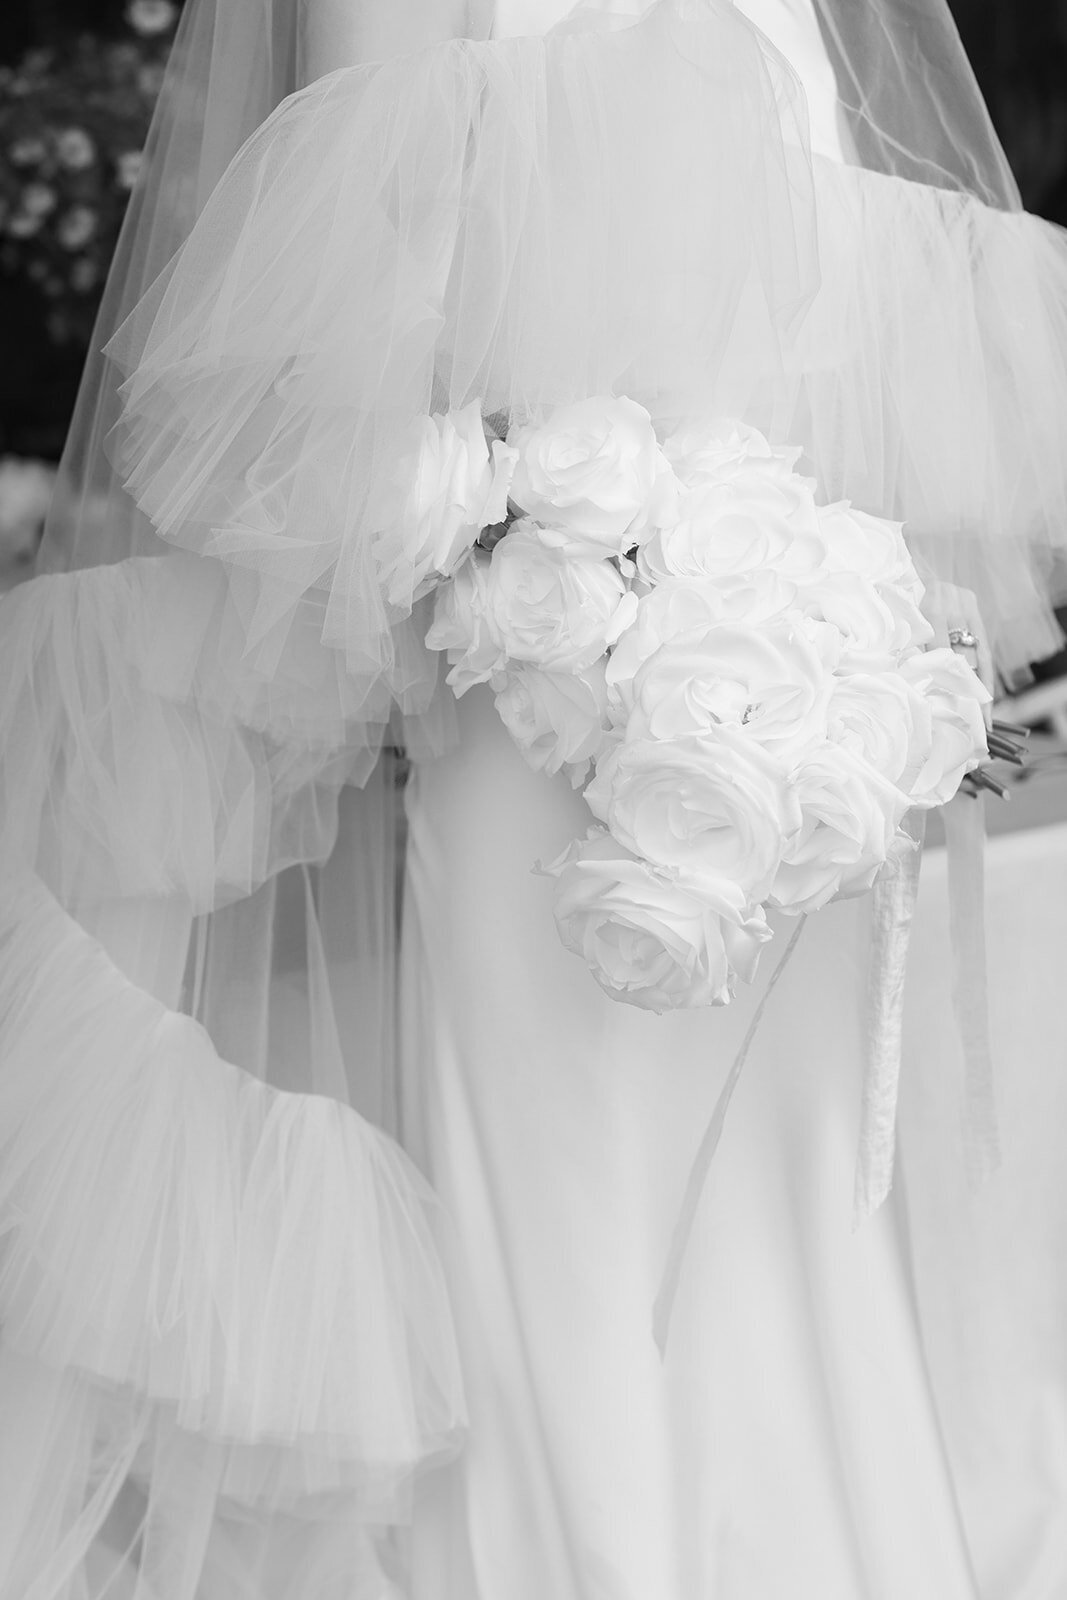 Black and white photo of a bride's ruffled veil and white bouquet